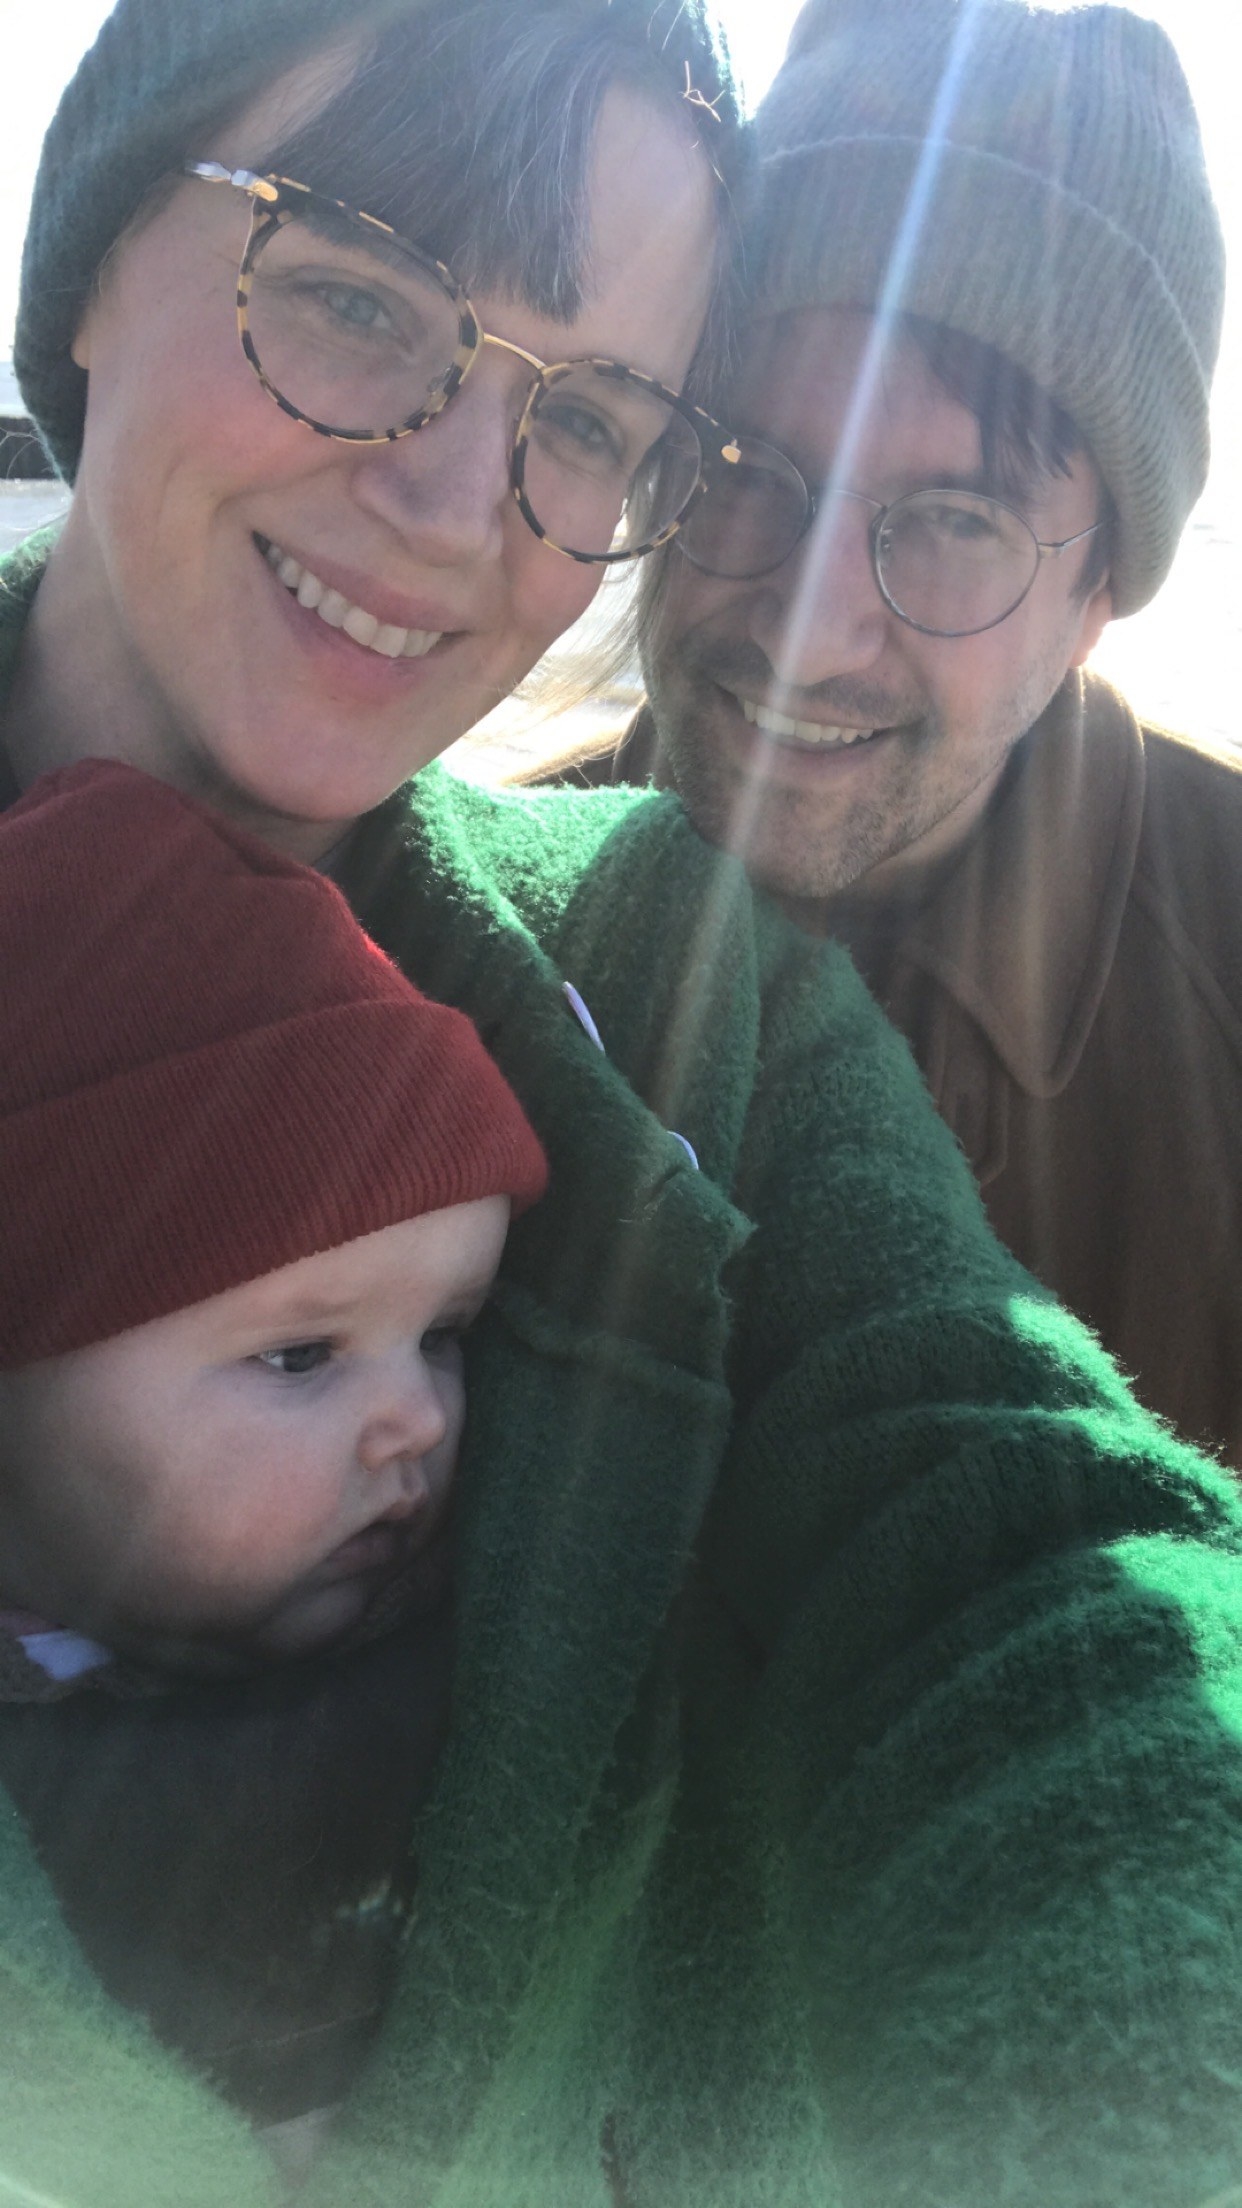 A selfie of Sophie, her husband, Luke, and their daughter outside in cold weather. Sophie is wearing a big green jacket that her daughter is tucked into.